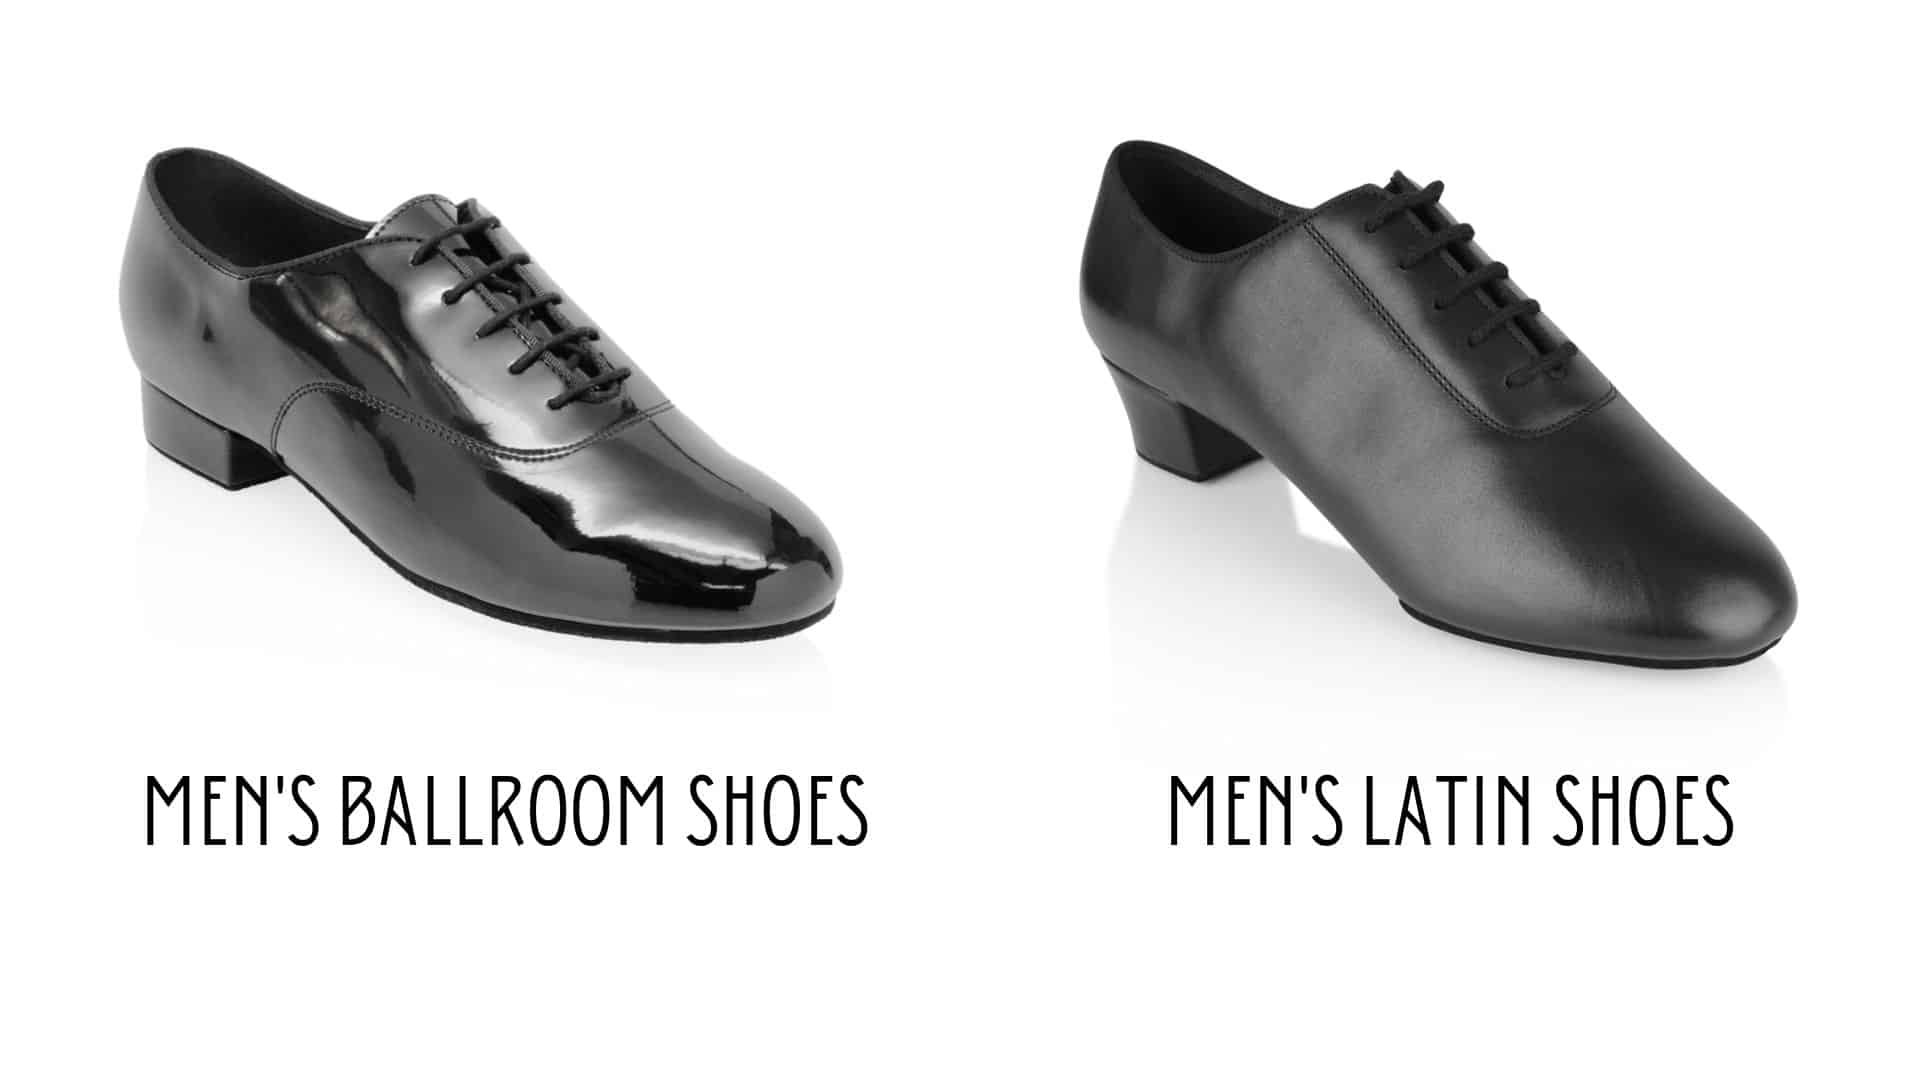 How To Choose Ballroom & Latin Dance Shoes: Guide for Ladies & Men